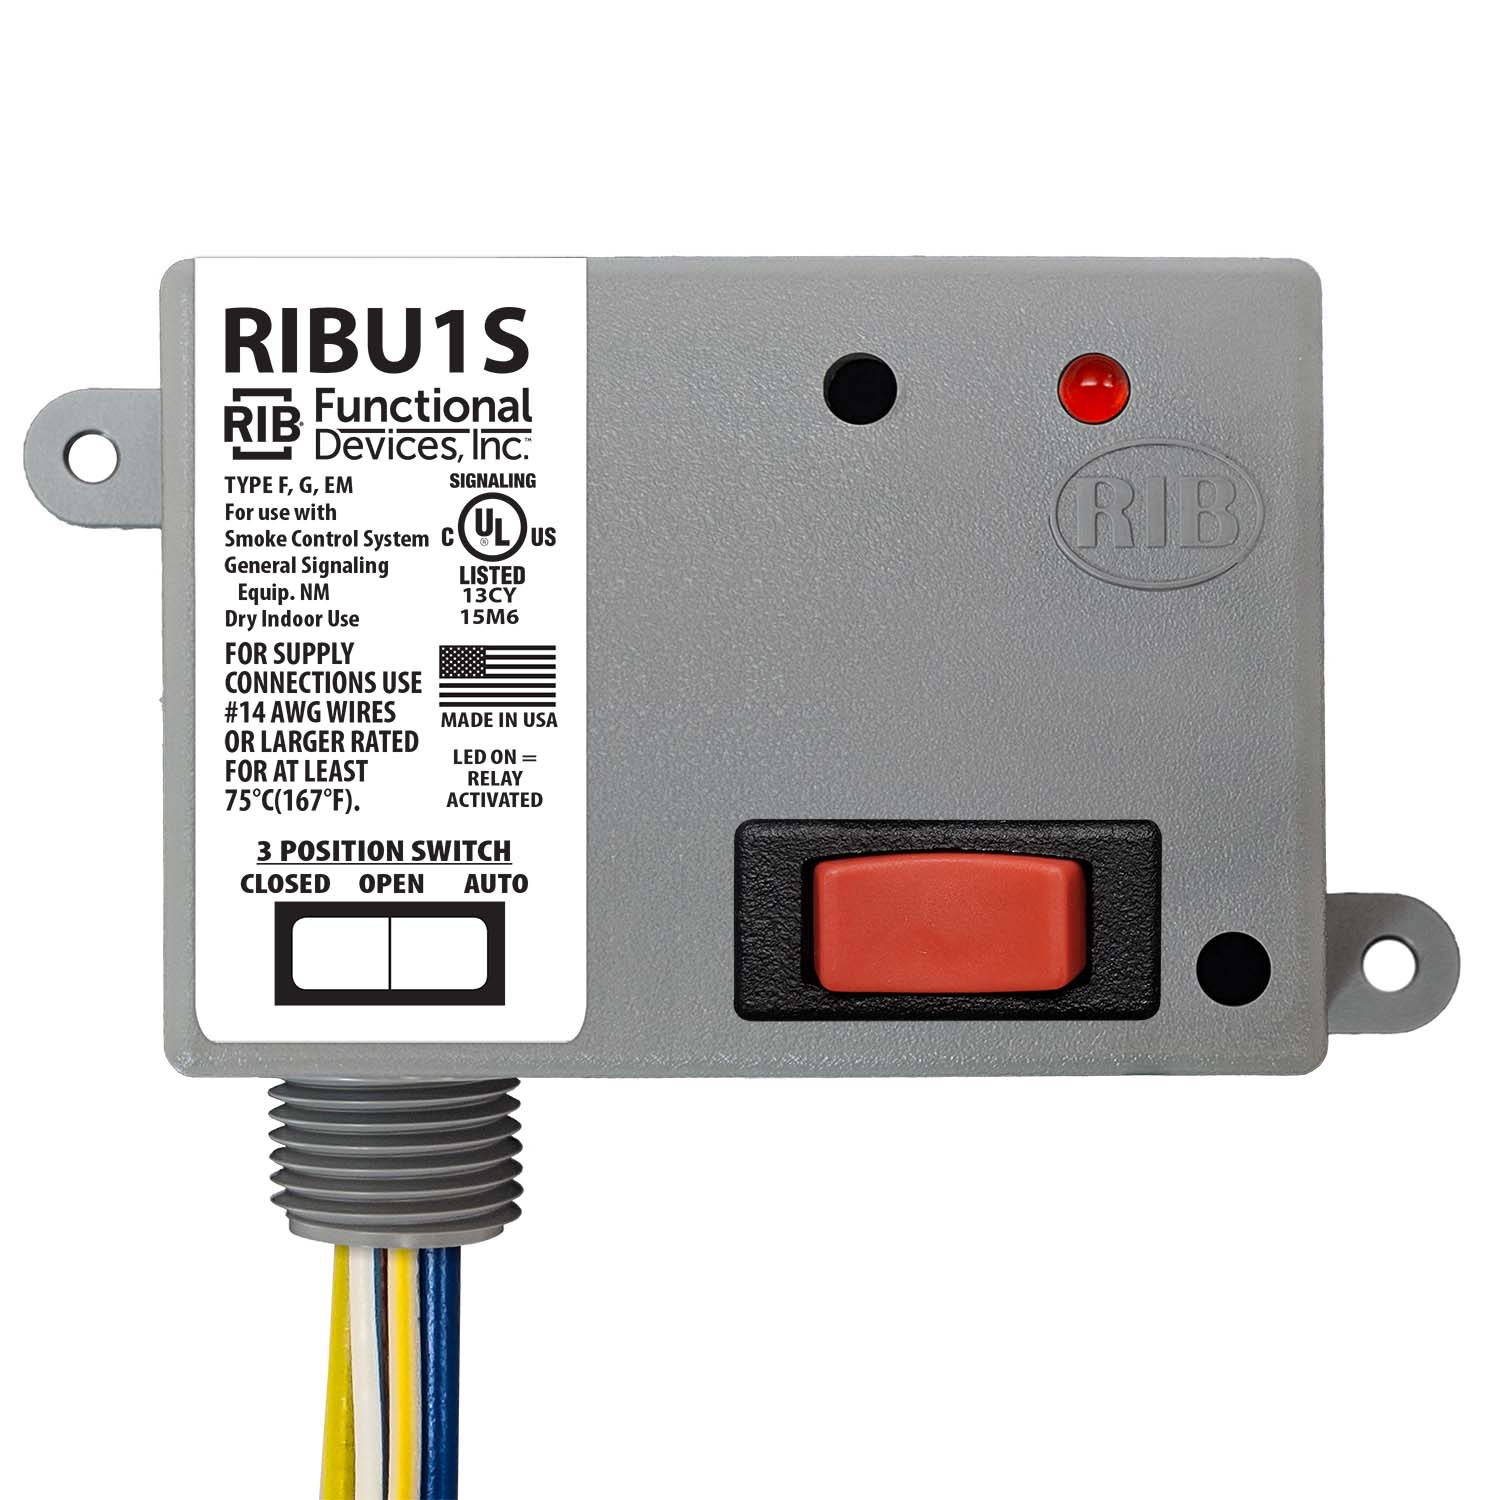 P/N Details about   FUNCTIONAL DEVICES RIB 10 AMP PILOT RELAY,10-30 VAC/DC,120 COIL RIBU1S-NC 